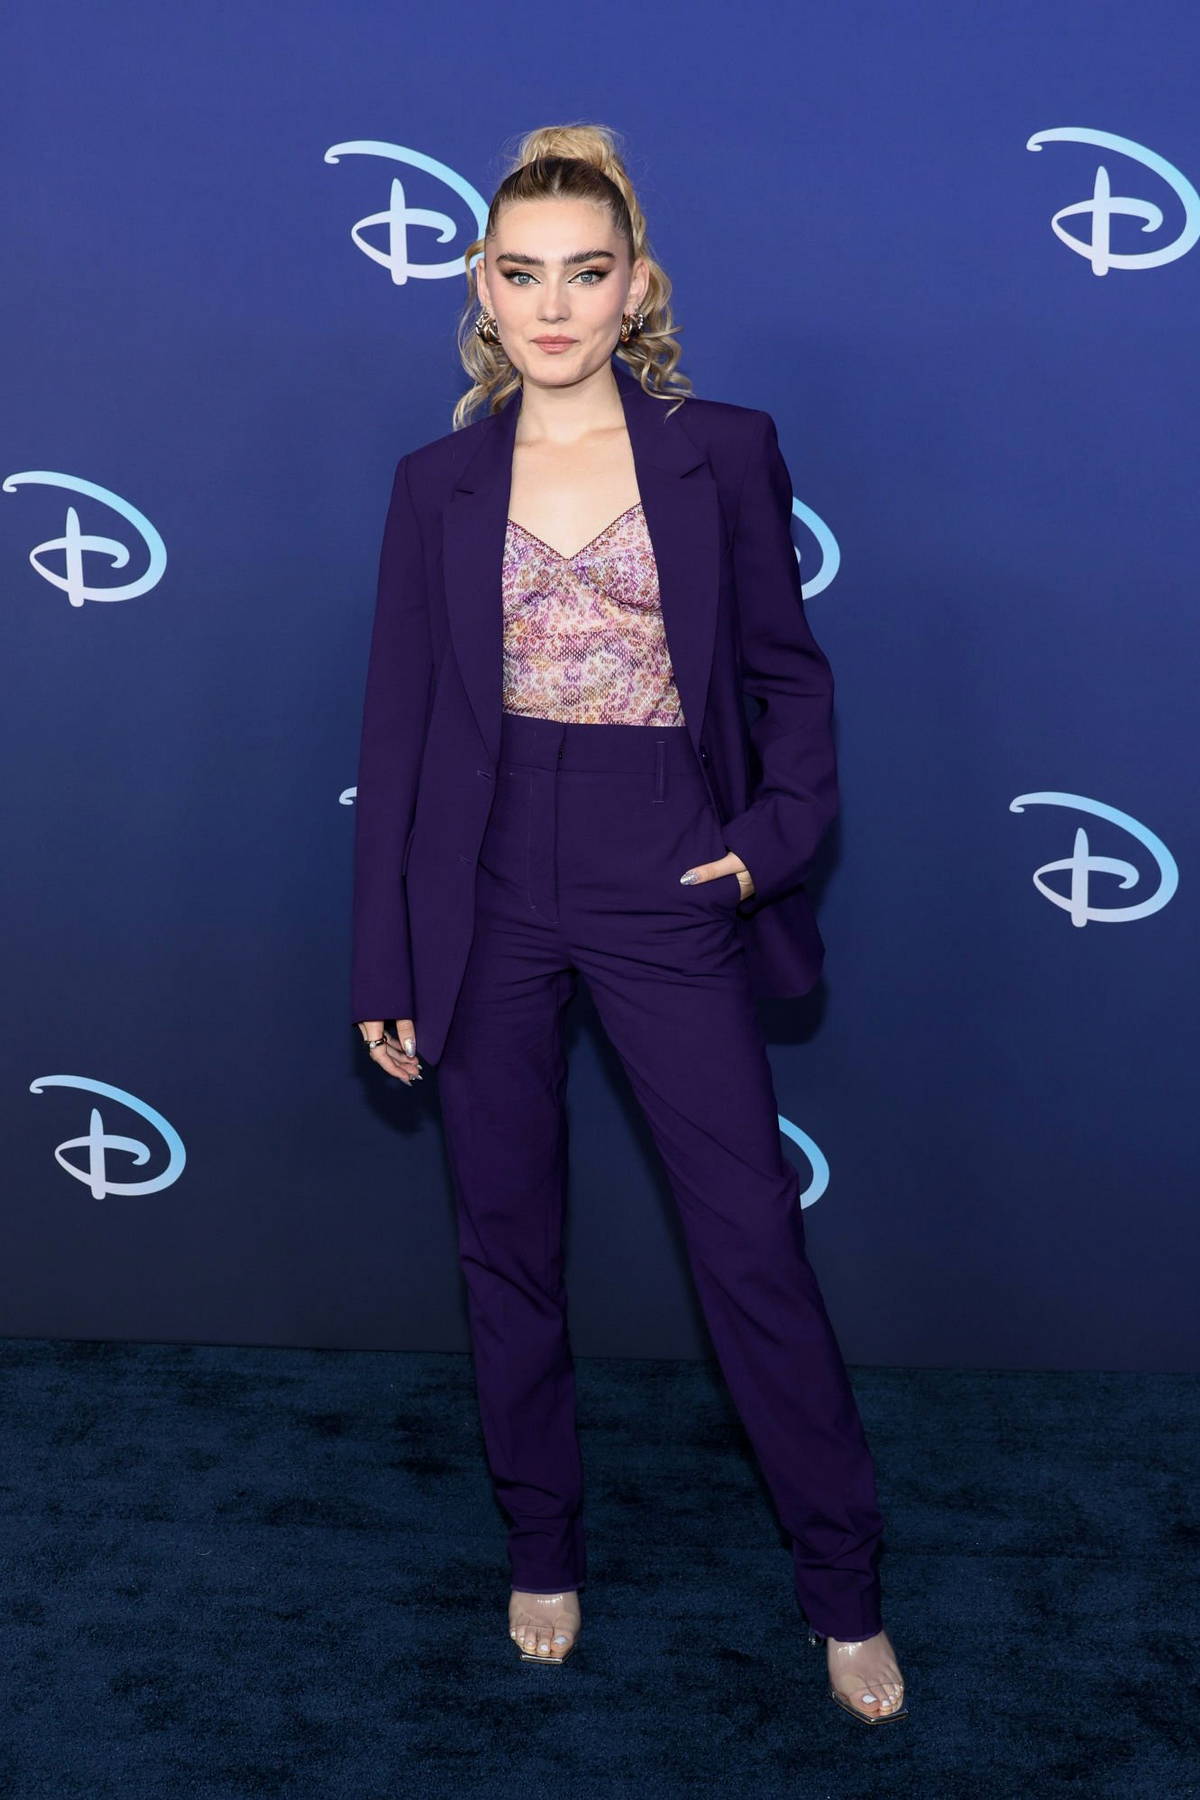 Meg Donnelly attends the 2022 ABC Disney Upfront at Basketball City in